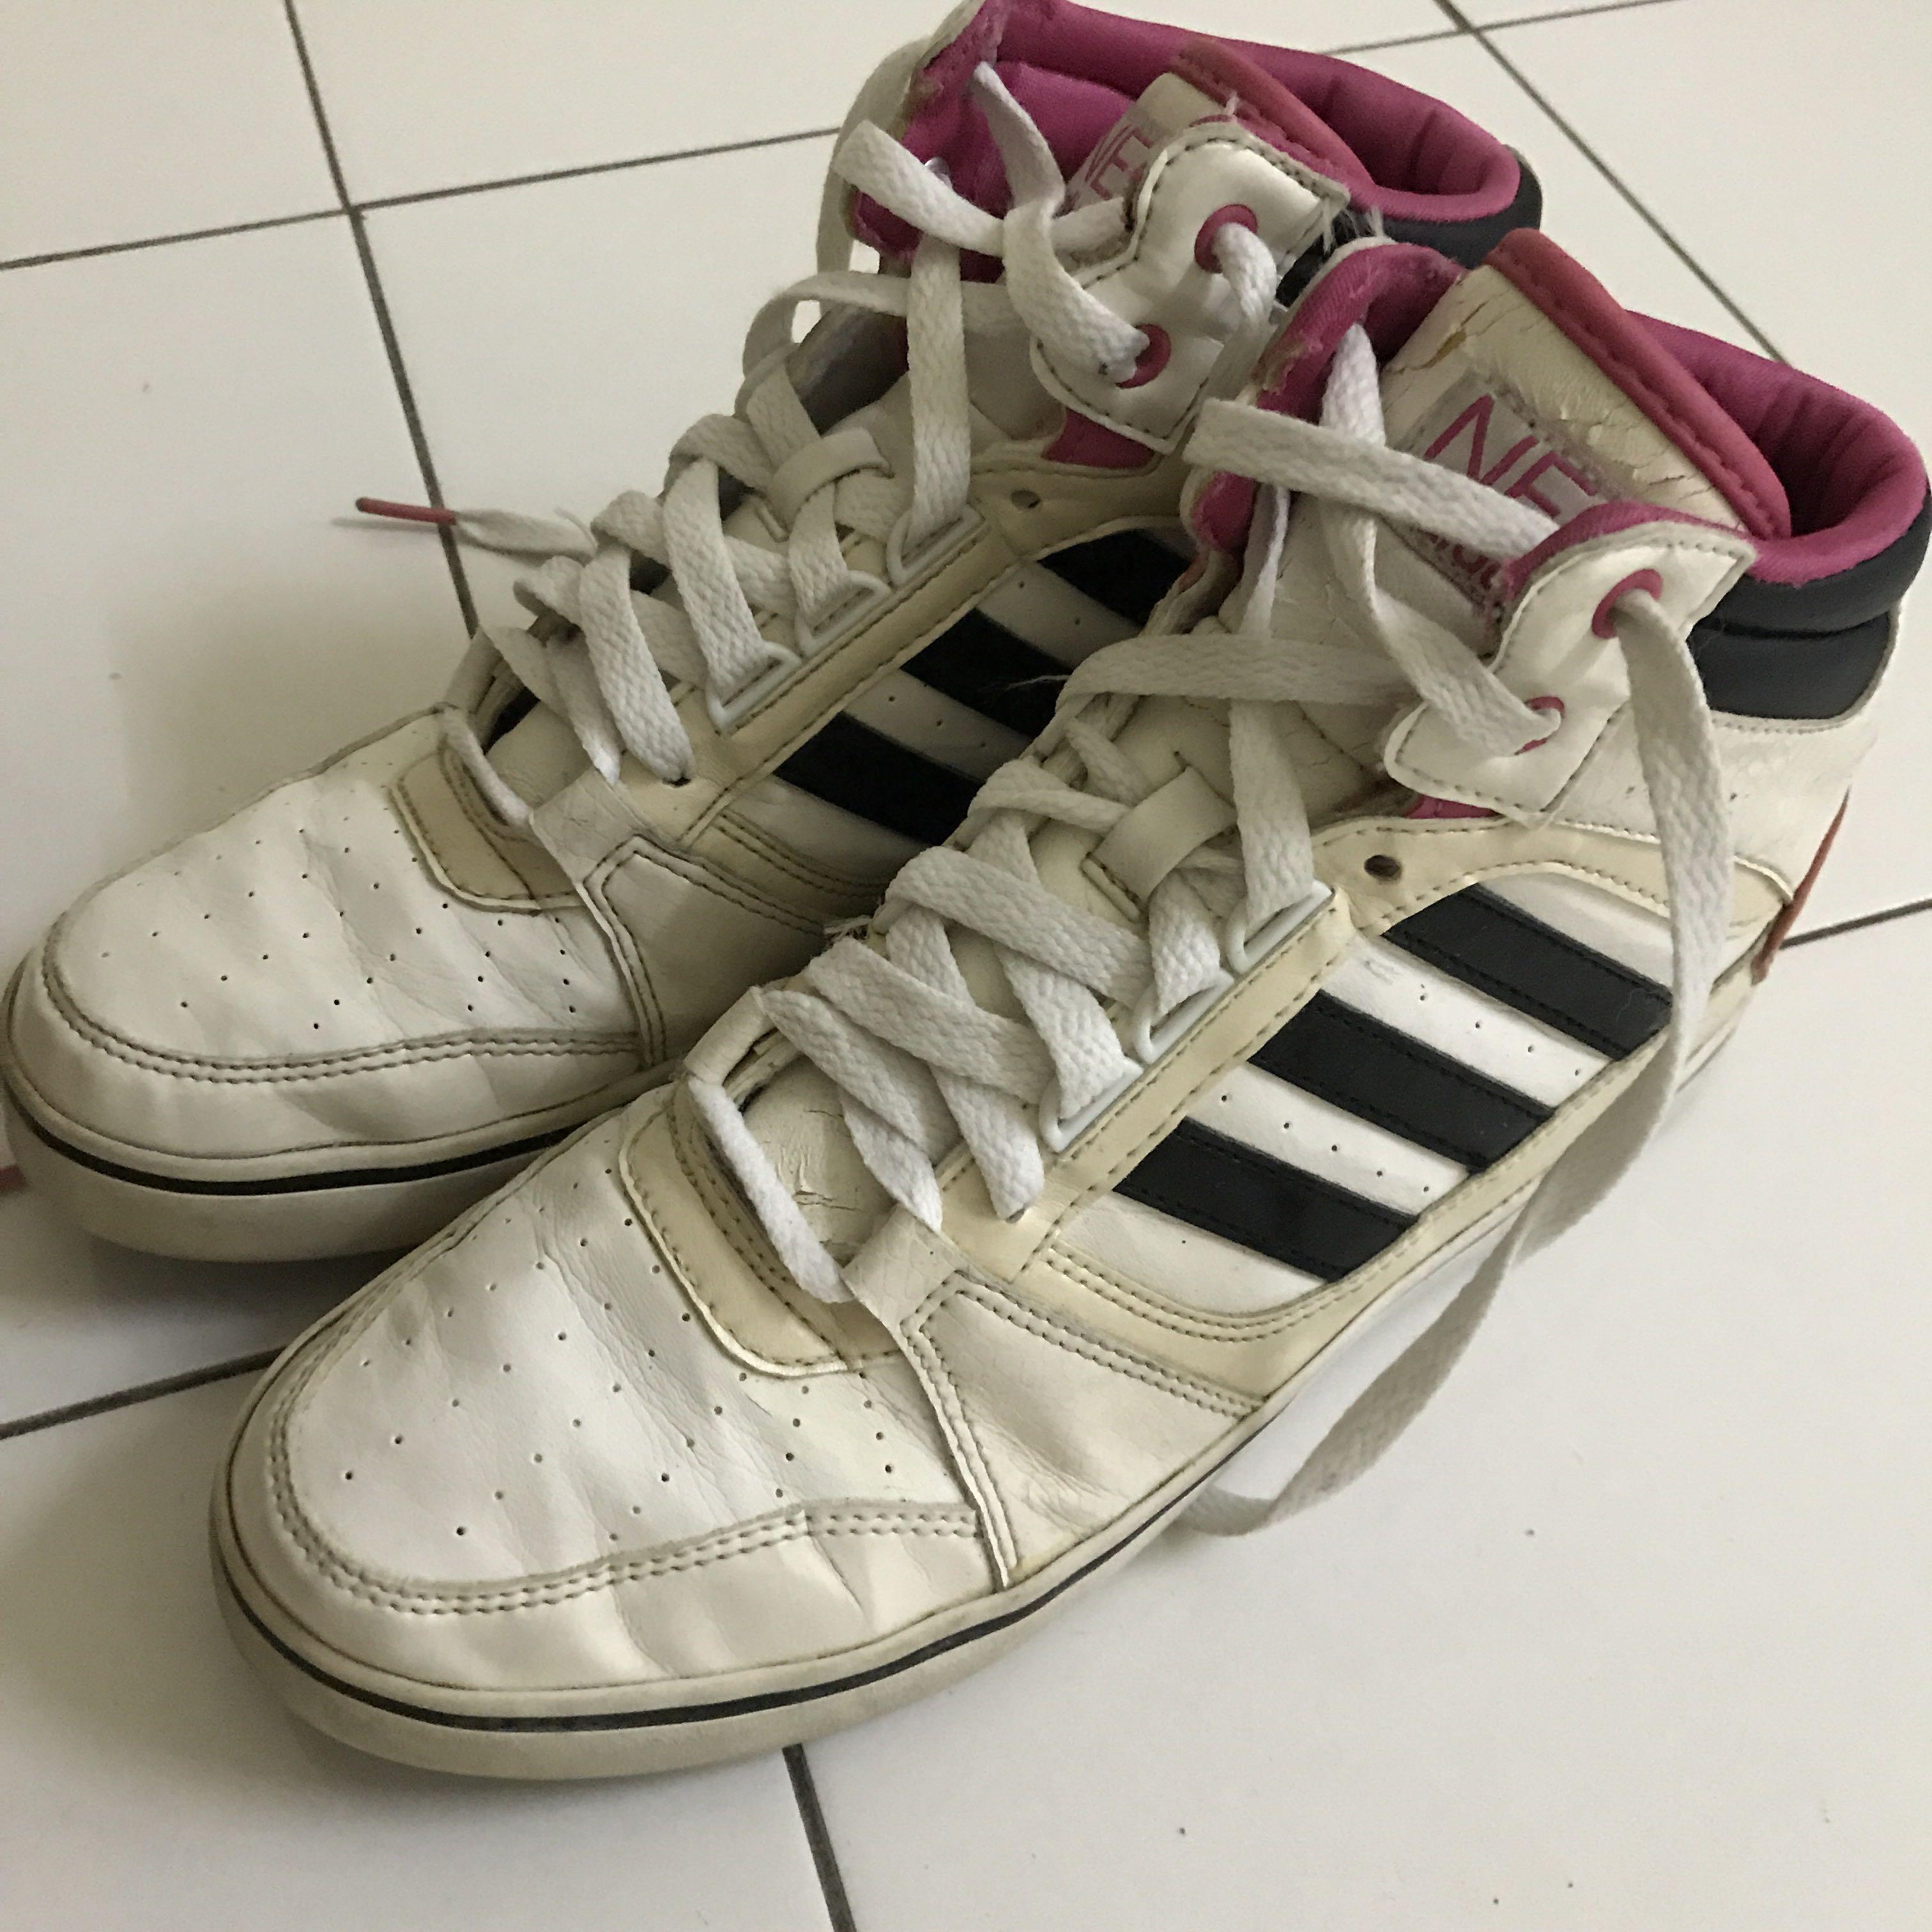 Authentic Adidas Neo Sneakers Pink Women S Fashion Shoes On Carousell